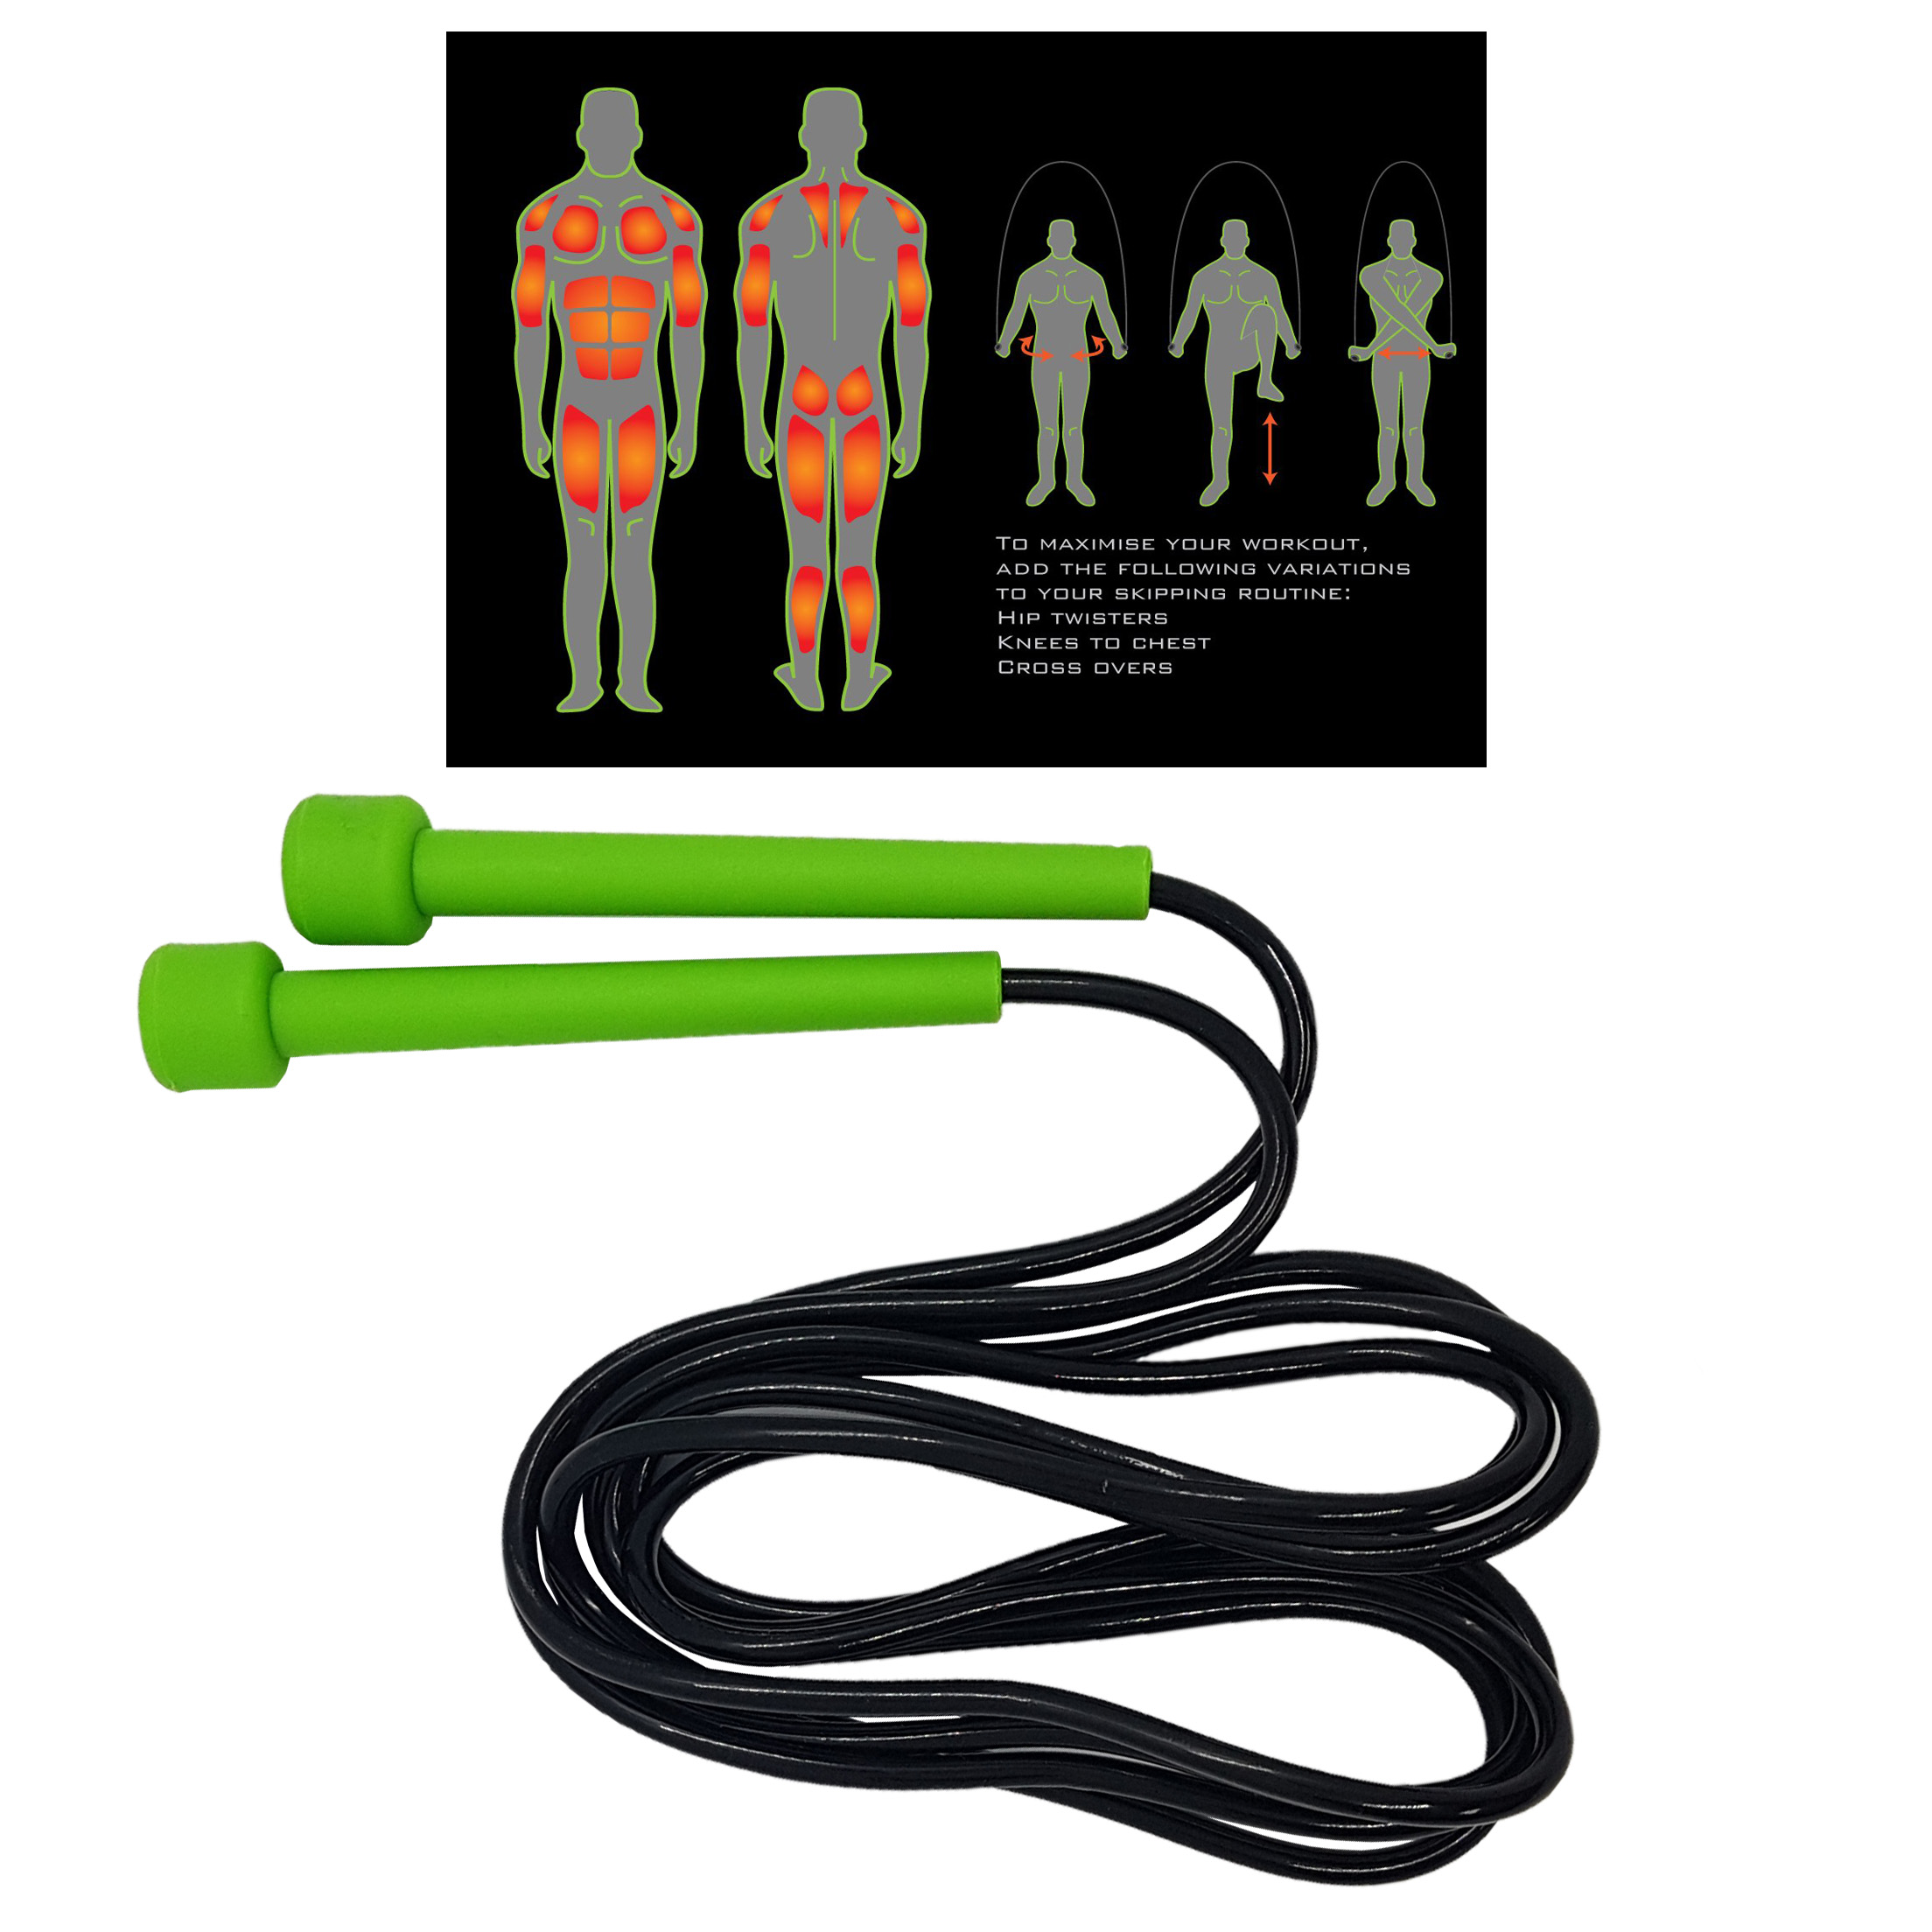 10 x Speed Skipping Rope Phoenix Fitness Gym Workout Equipment UK SELLER / RY917